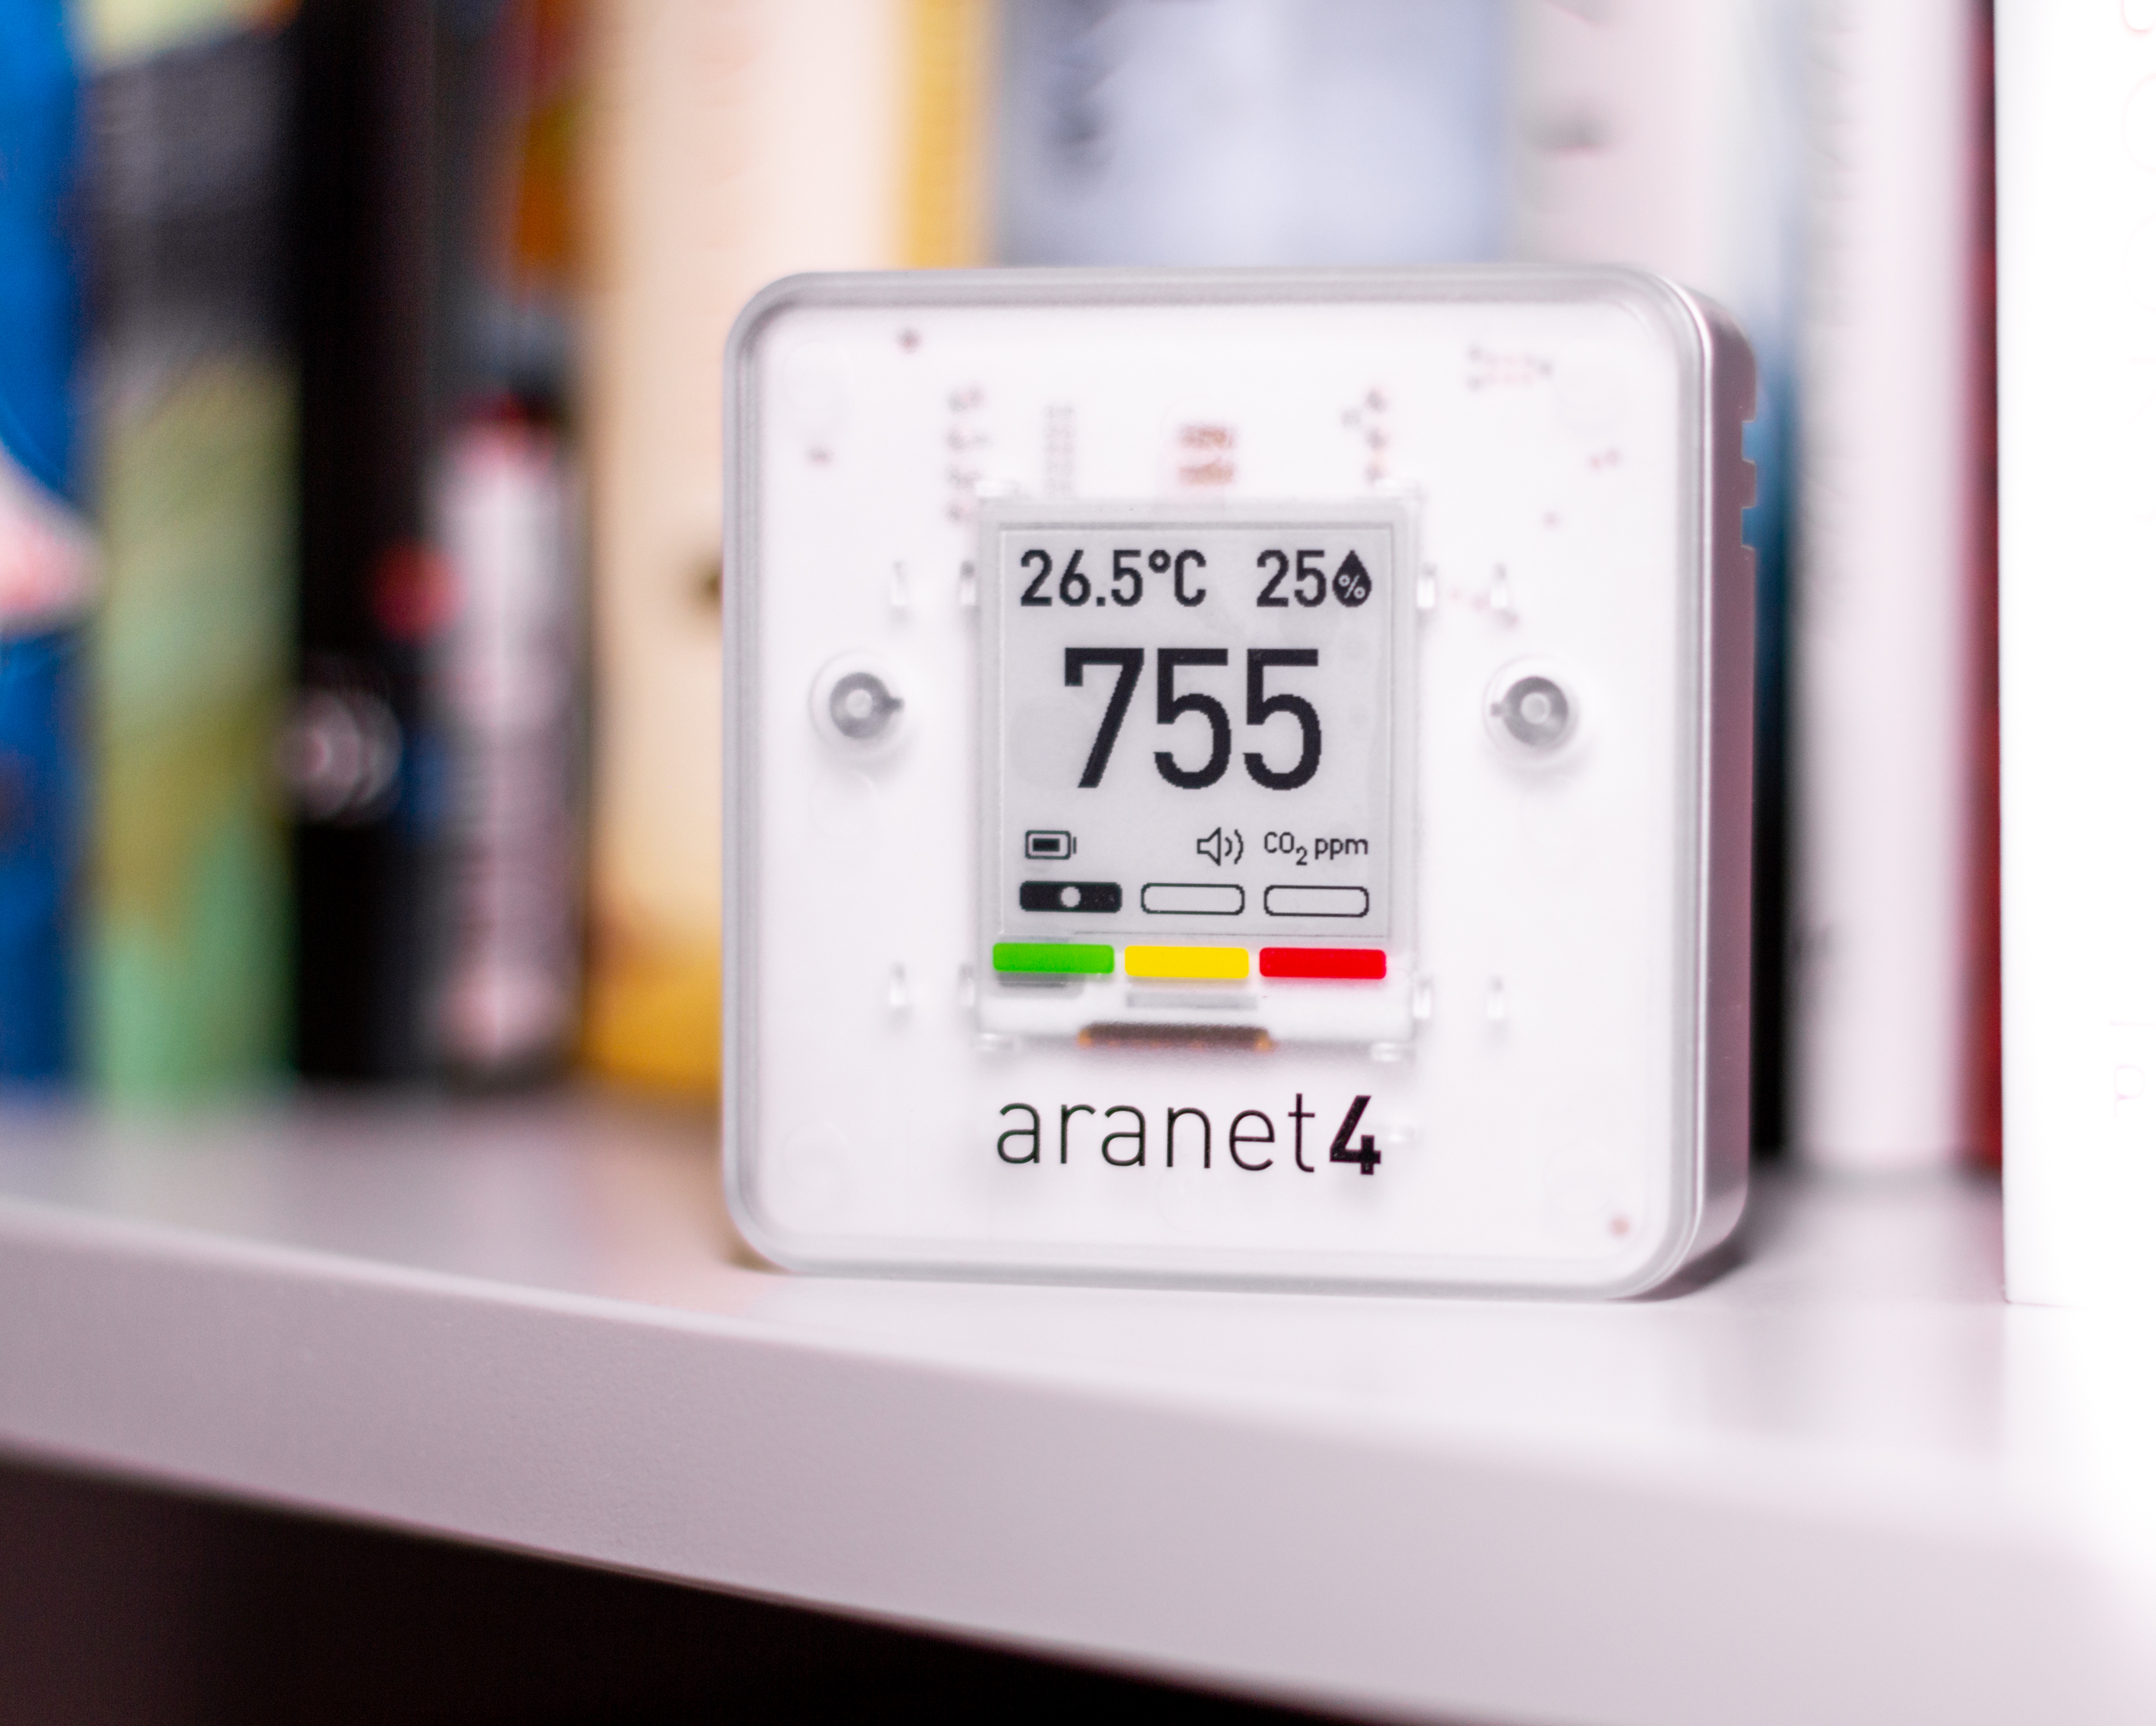 An Aranet4 Home Indoor Air Quality Monitor sits on a shelf. It shows a ‘safe’ reading of 775 ppm, as well as temperature and relative humidity readings.